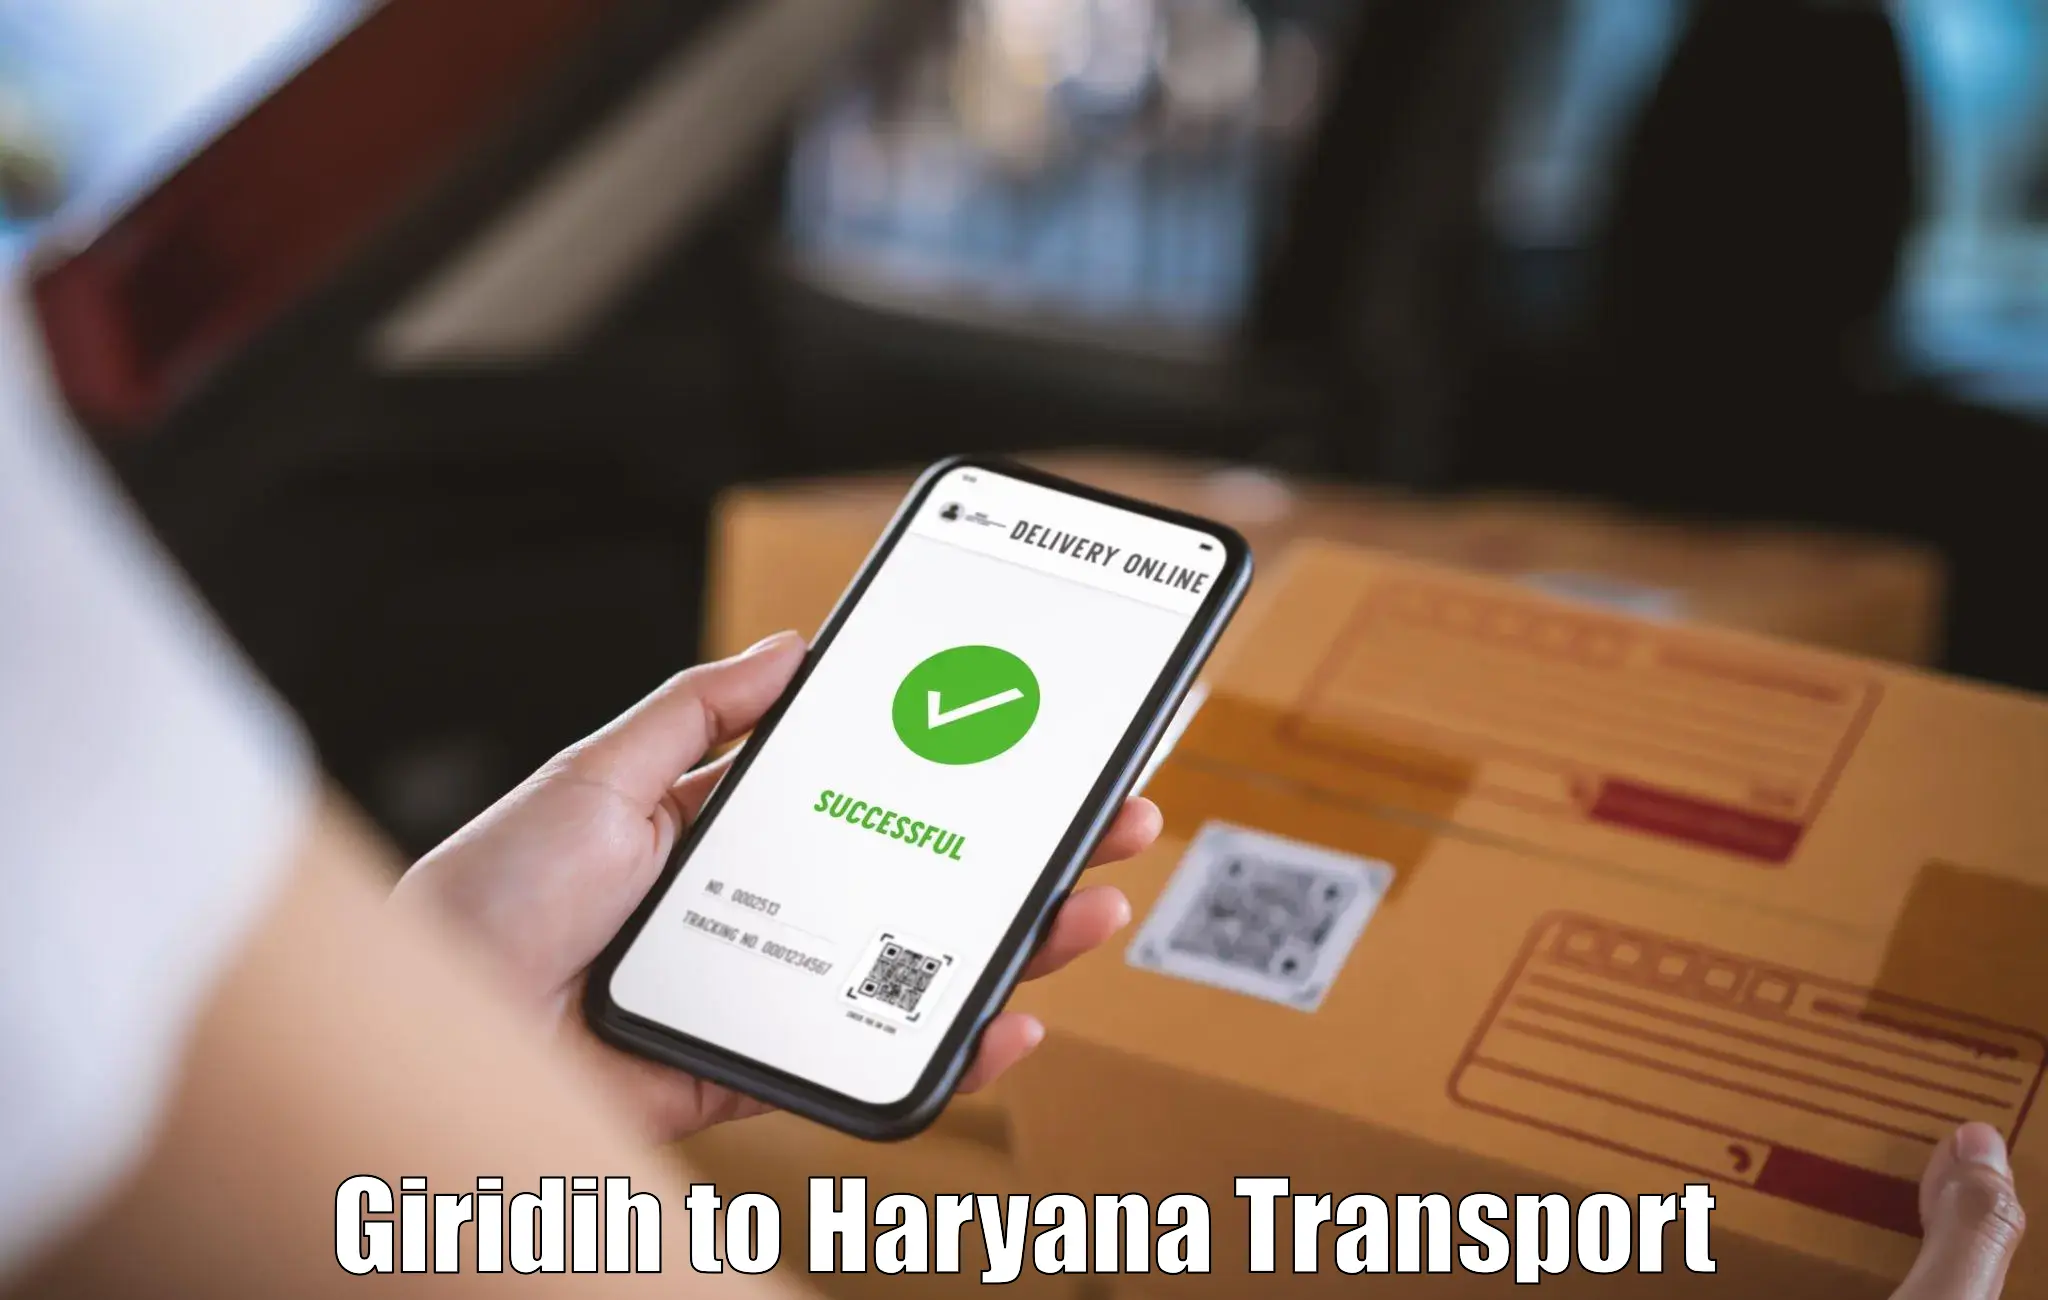 Package delivery services Giridih to Charkhari